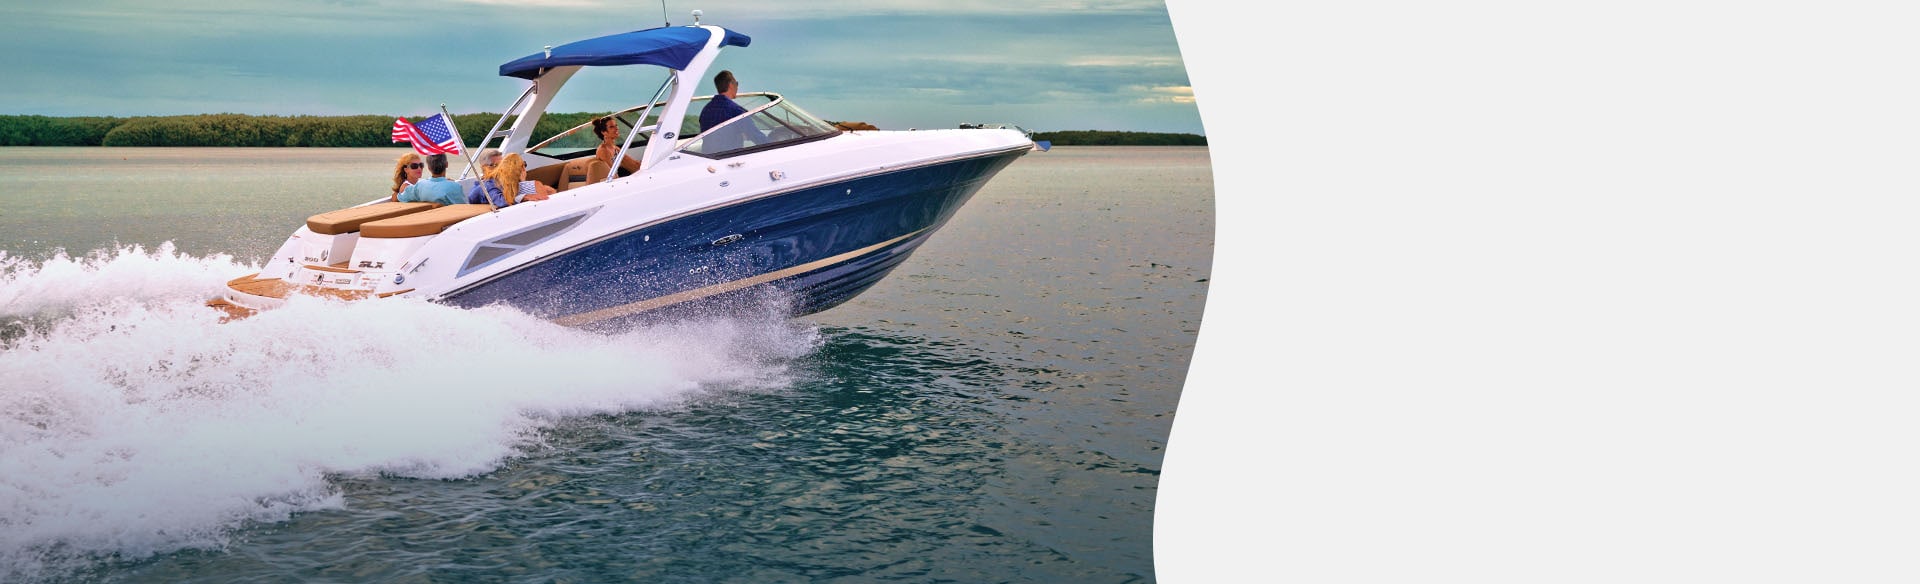 Up to 50% off Life Jackets, Trailering Essentials, Boating Upgrades & More